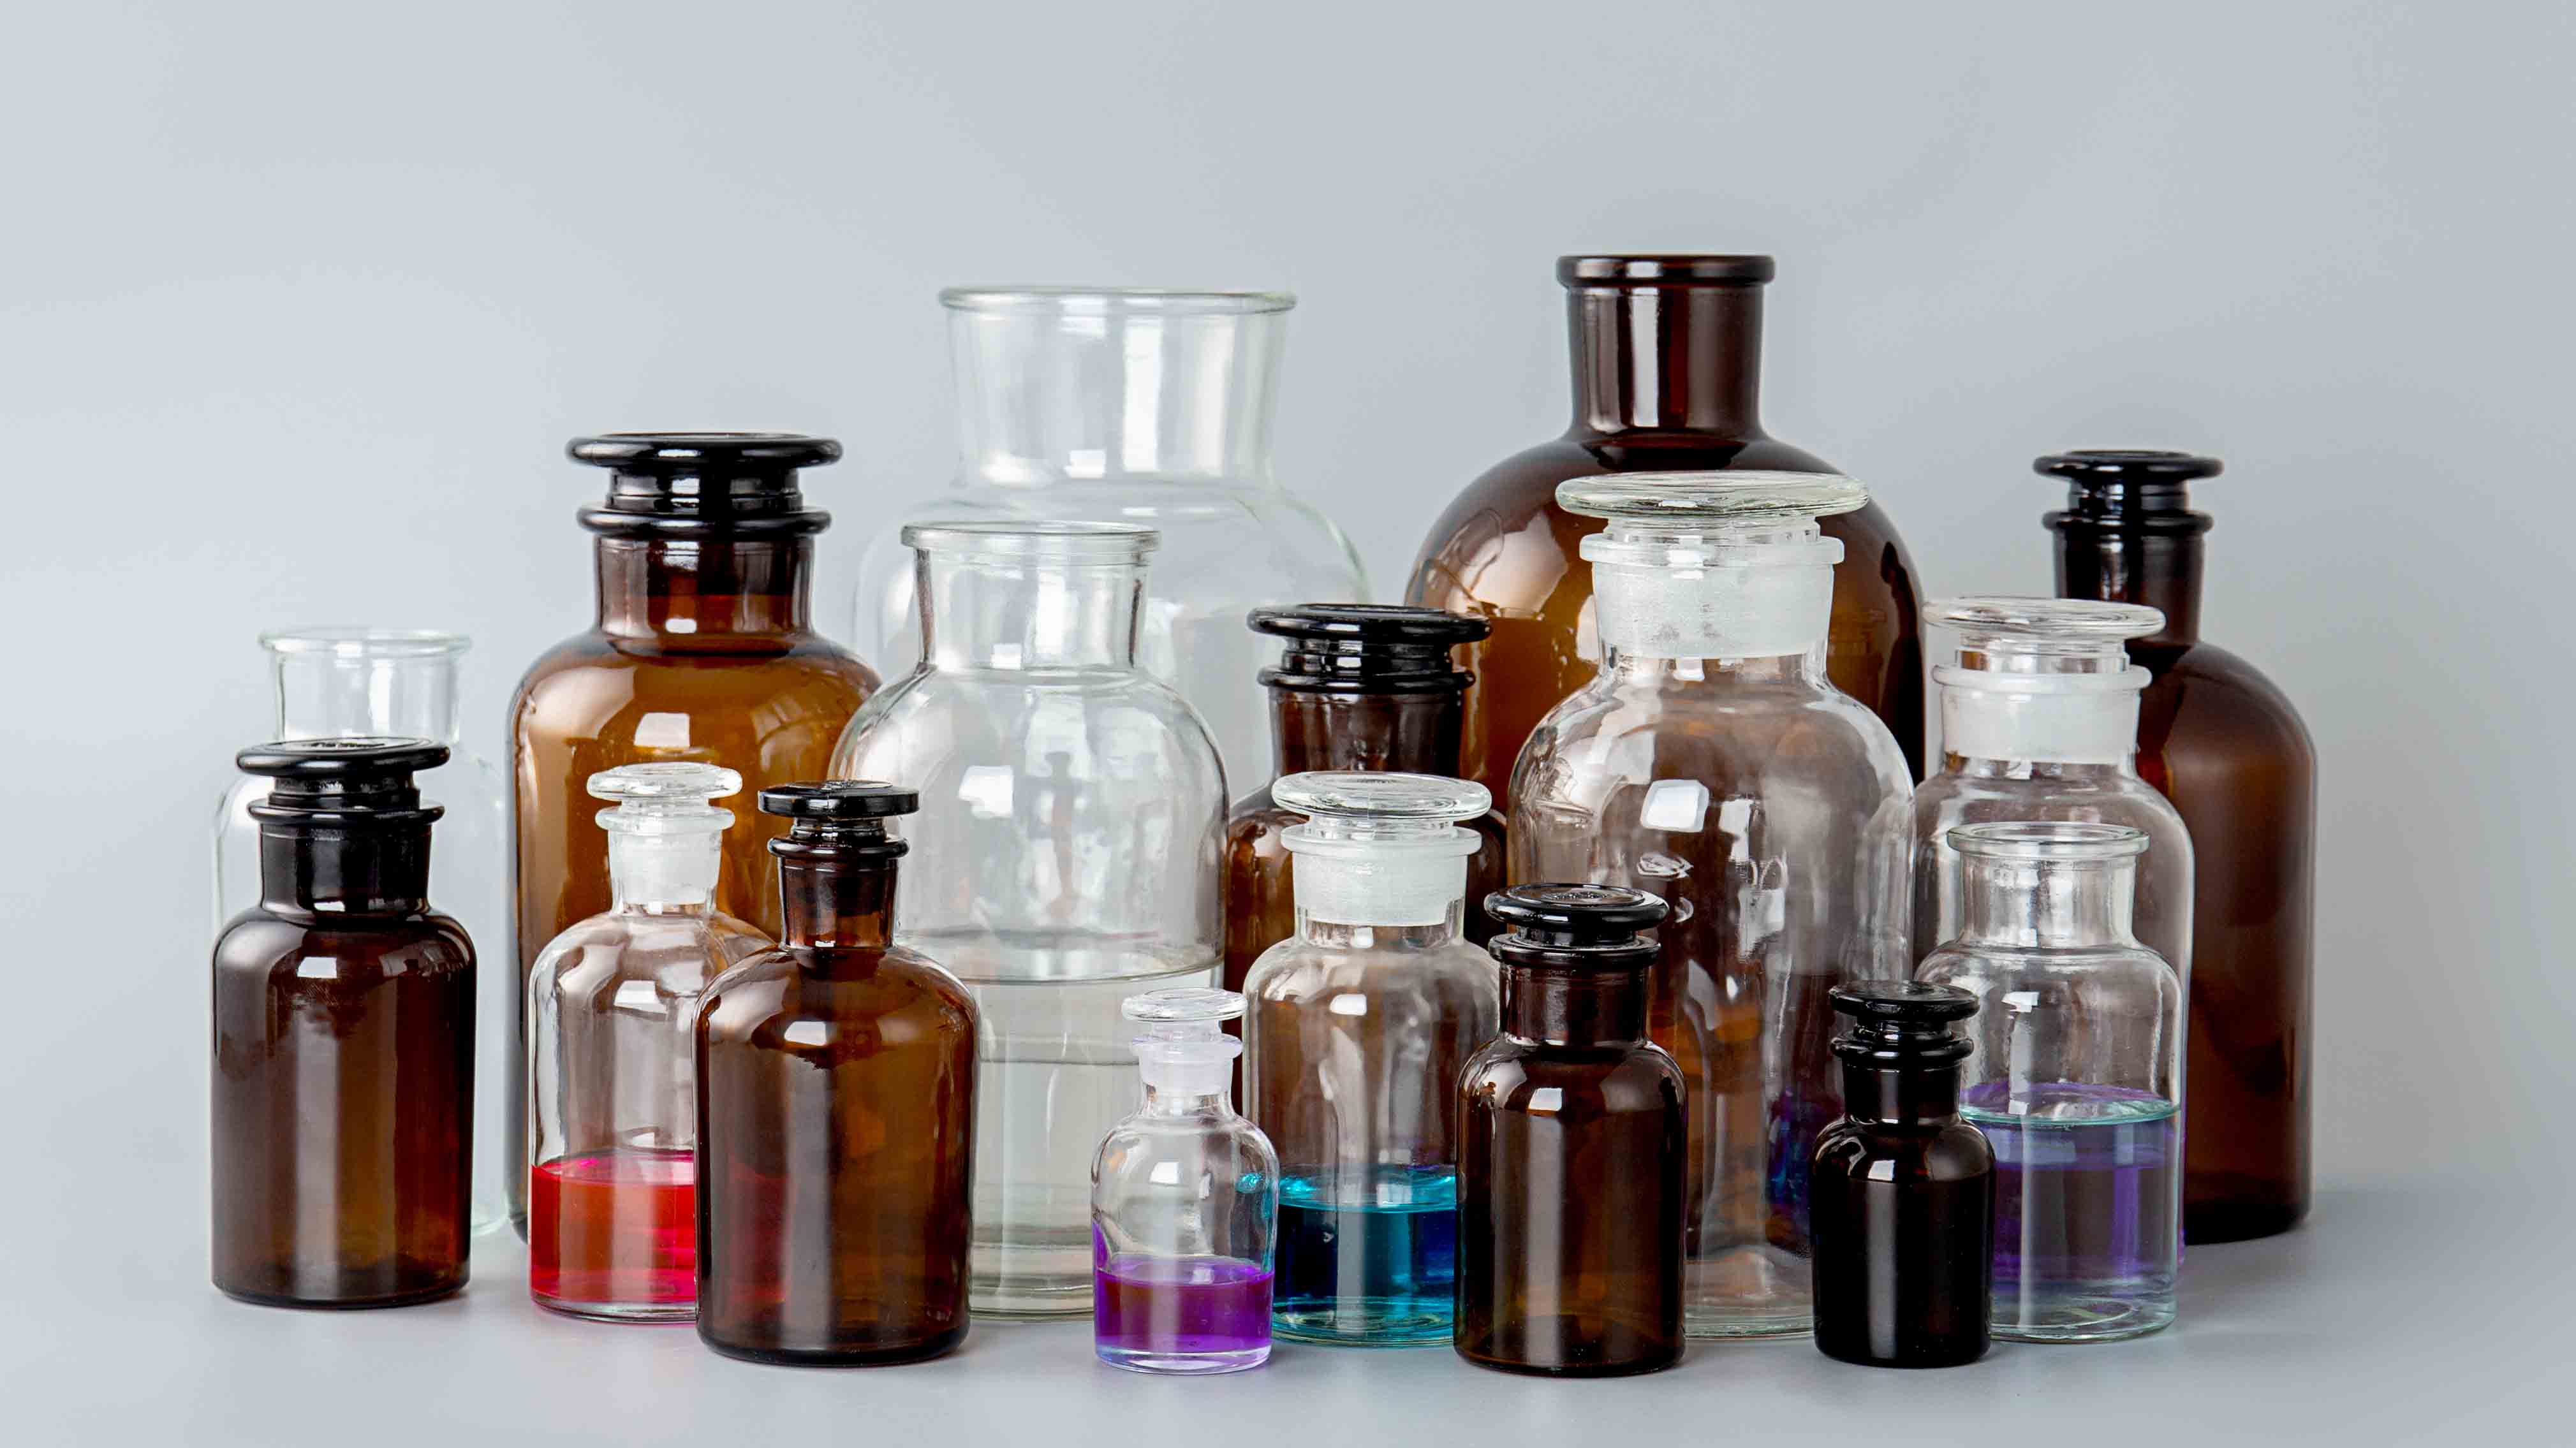 How to choose reagent glass bottles?